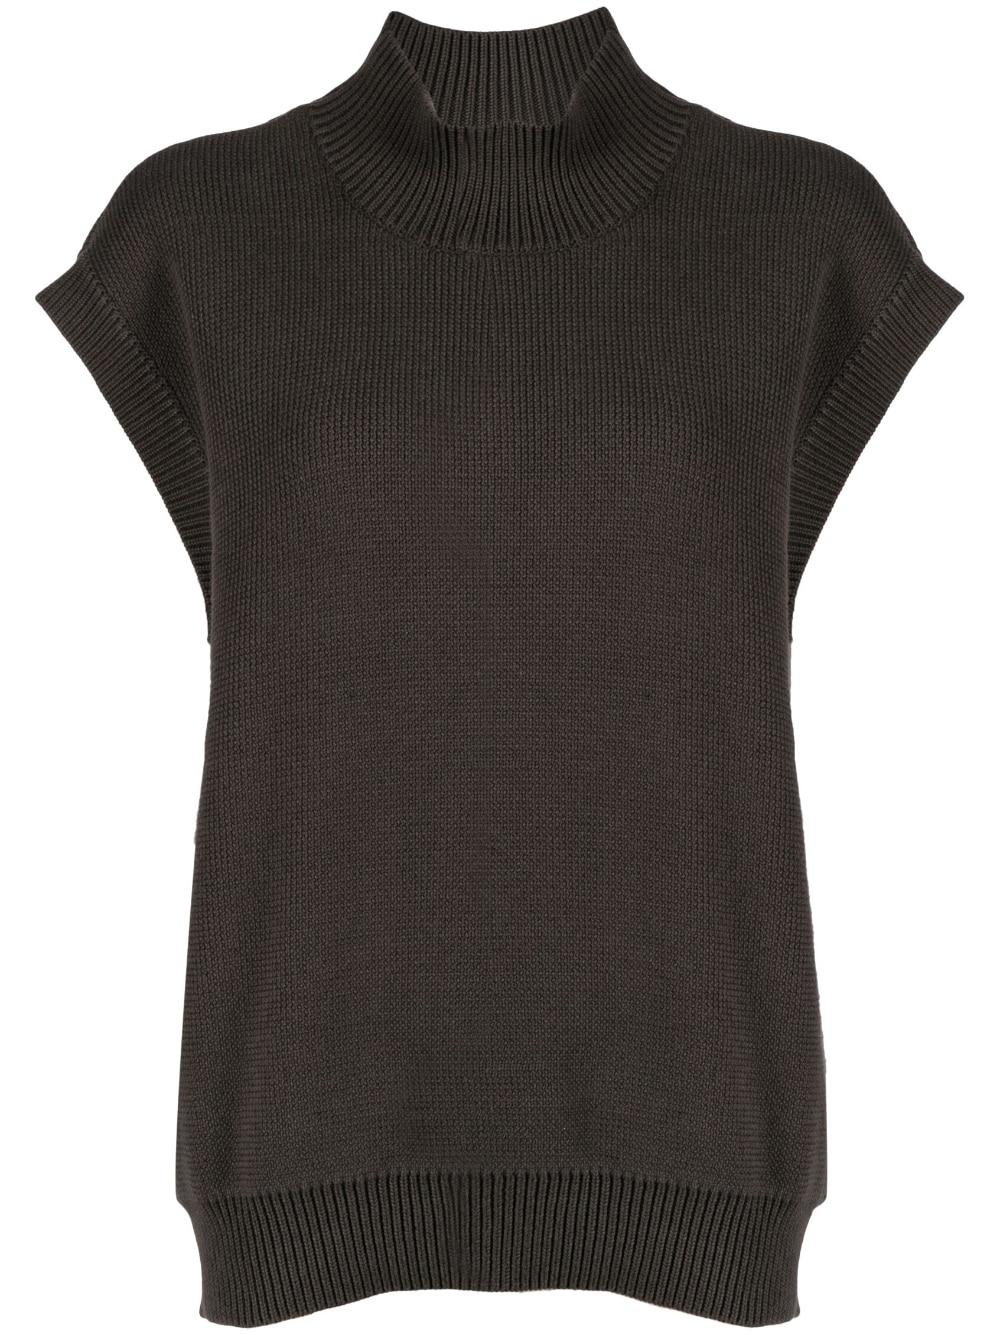 Fear of God ESSENTIALS Turtleneck Knitted Sleeveless Top in Black | Lyst